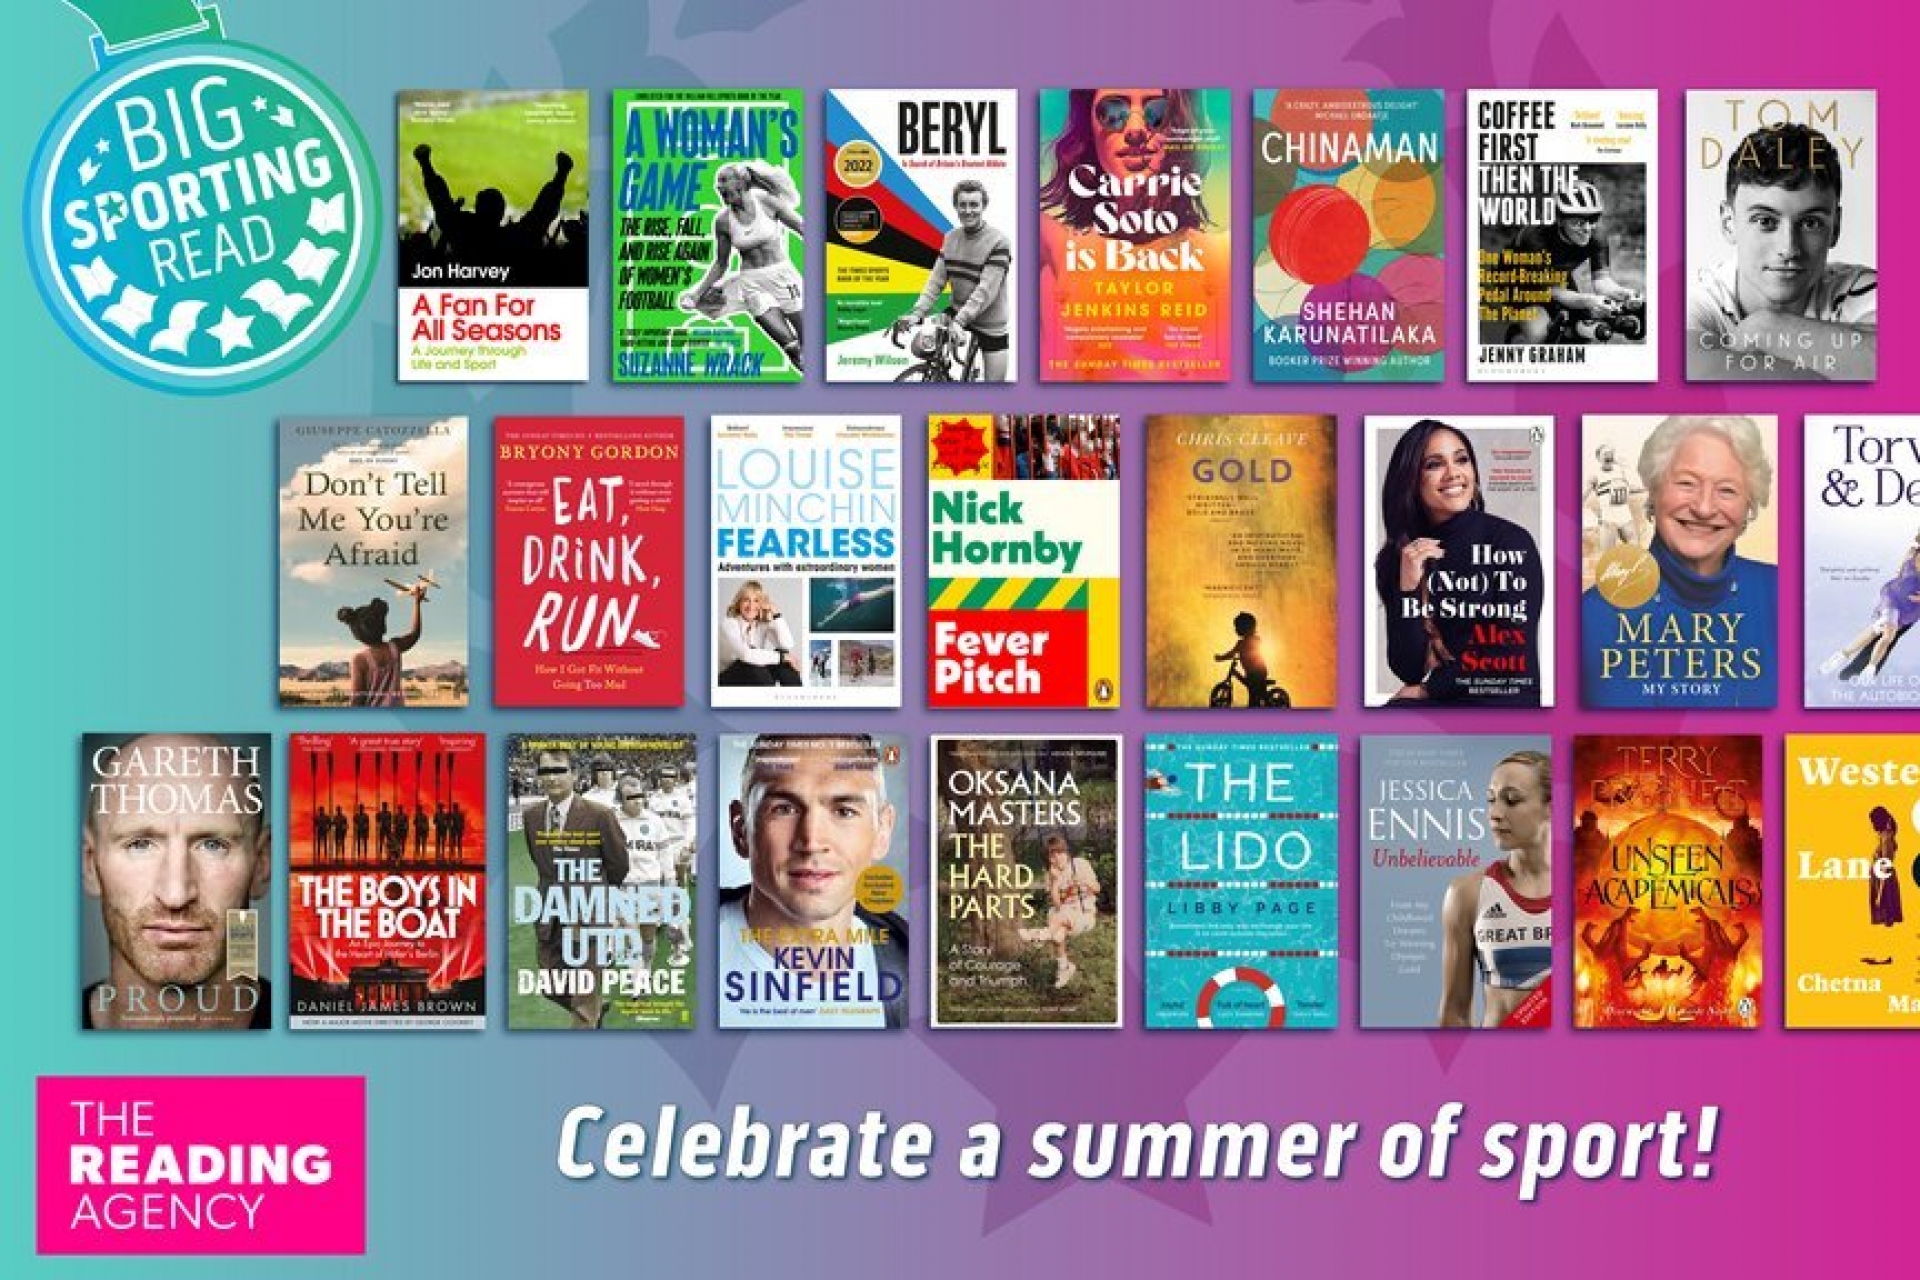 The Big Sporting Read by The Reading Agency - Books to celebrate a landmark summer of sport